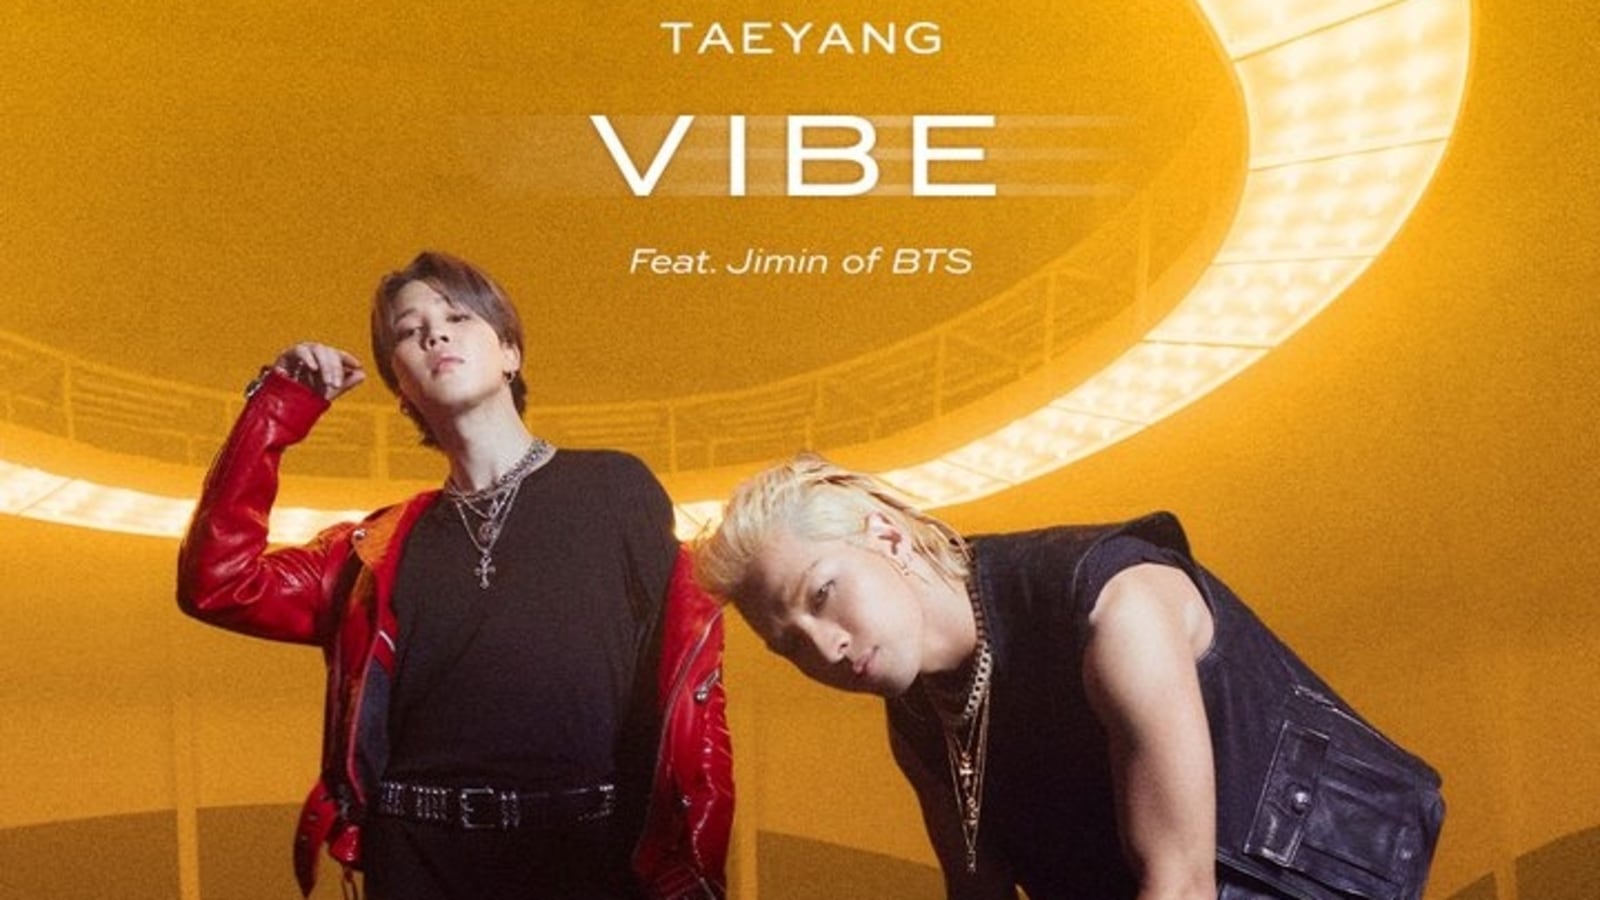 BTS Jimin will collaborate with Taeyang for new song. See poster, check